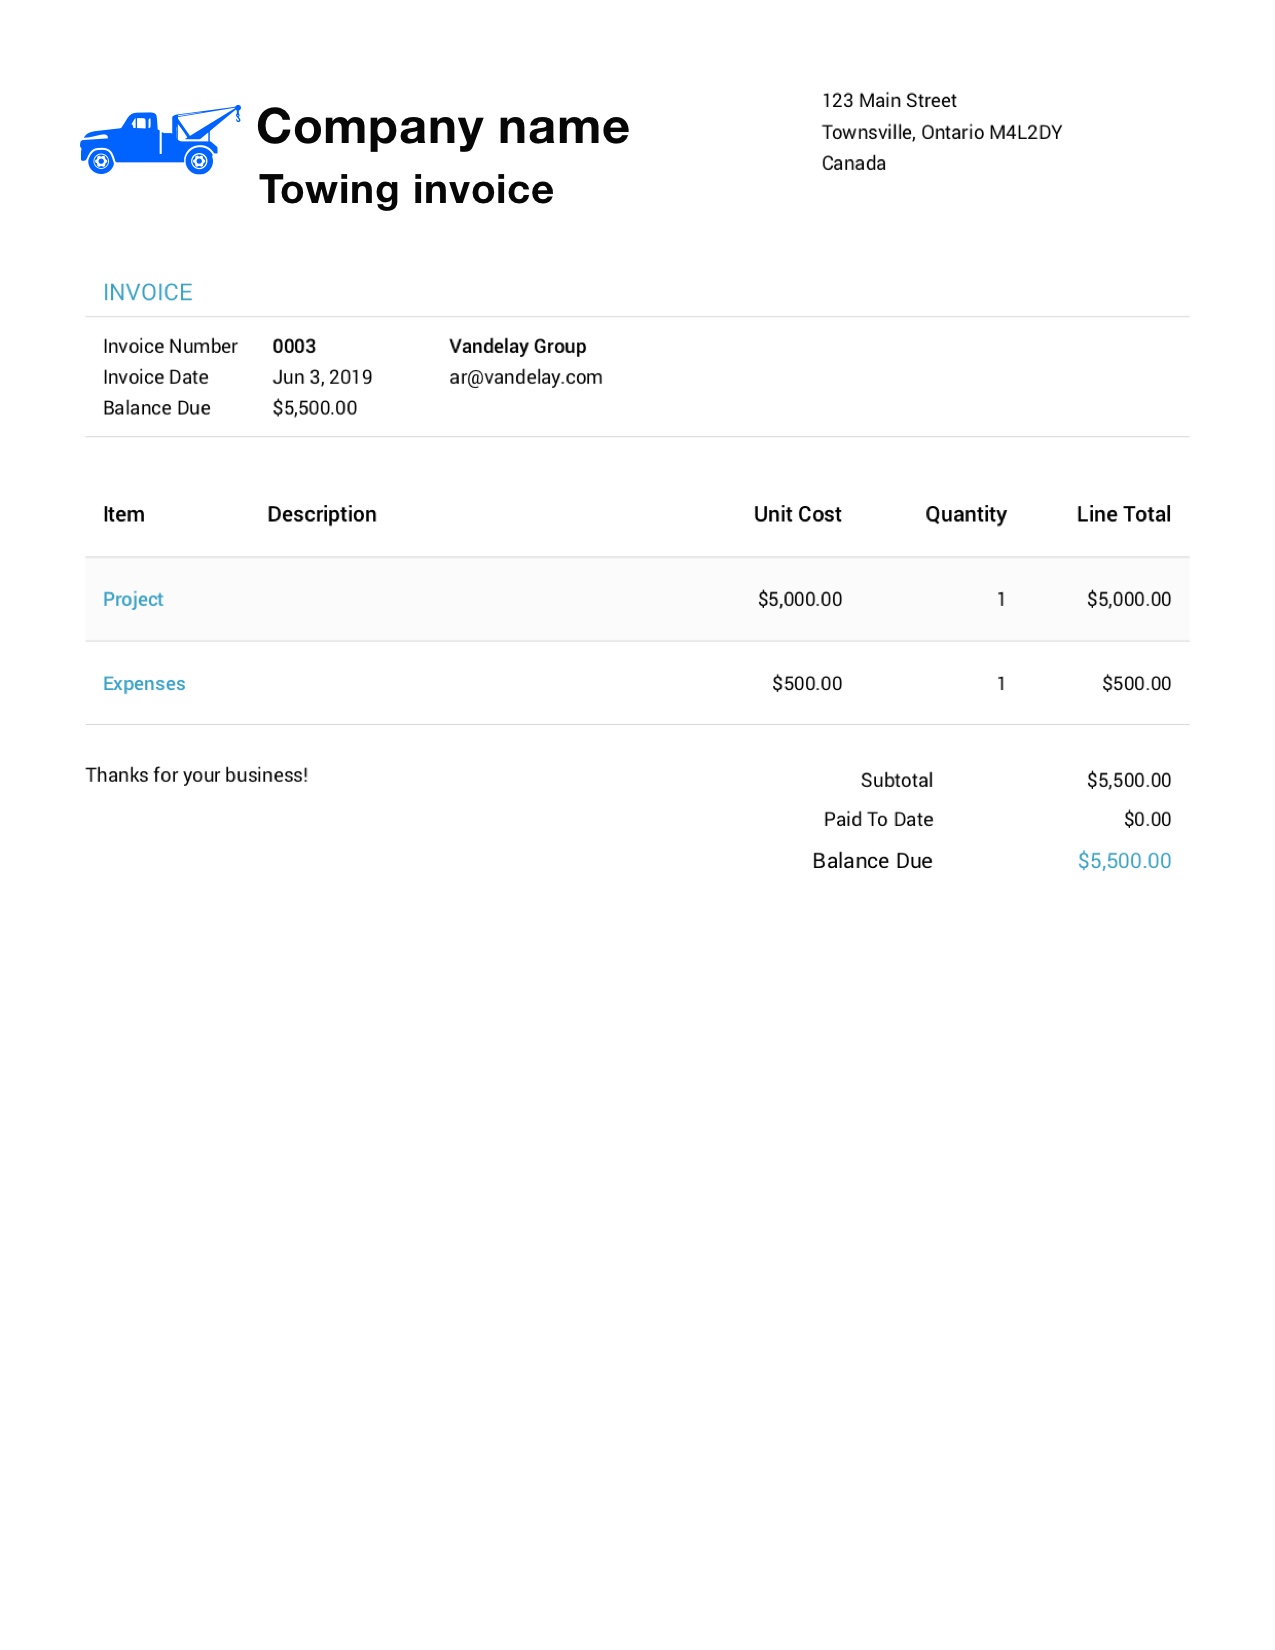 Free Towing Invoice Template. Customize and Send in 22 Seconds For Towing Service Invoice Template